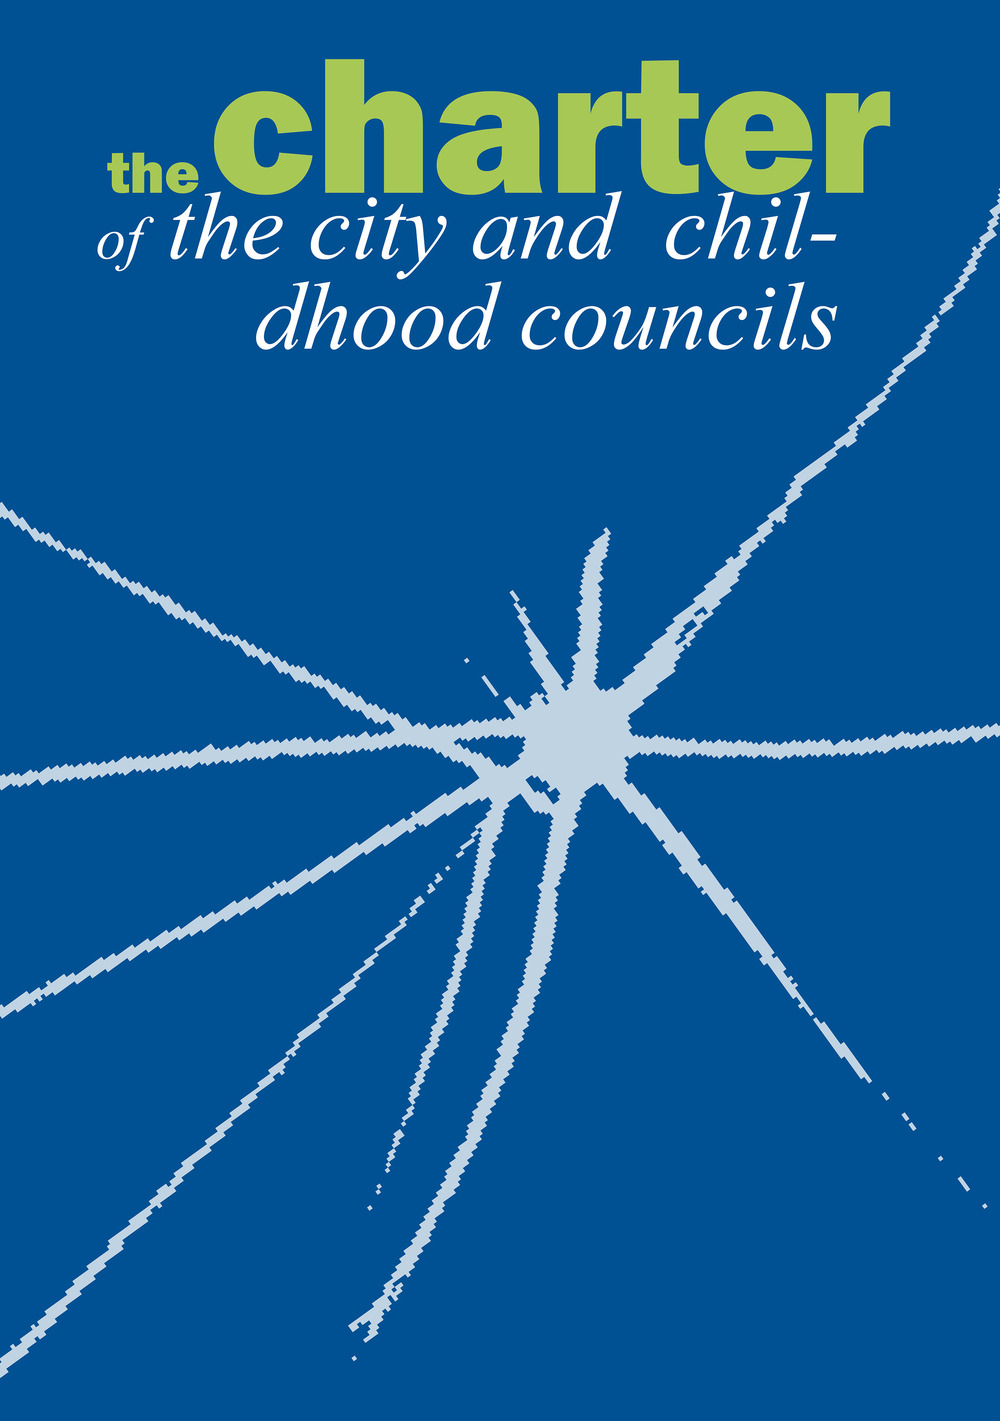 The charter of the city and childhood councils